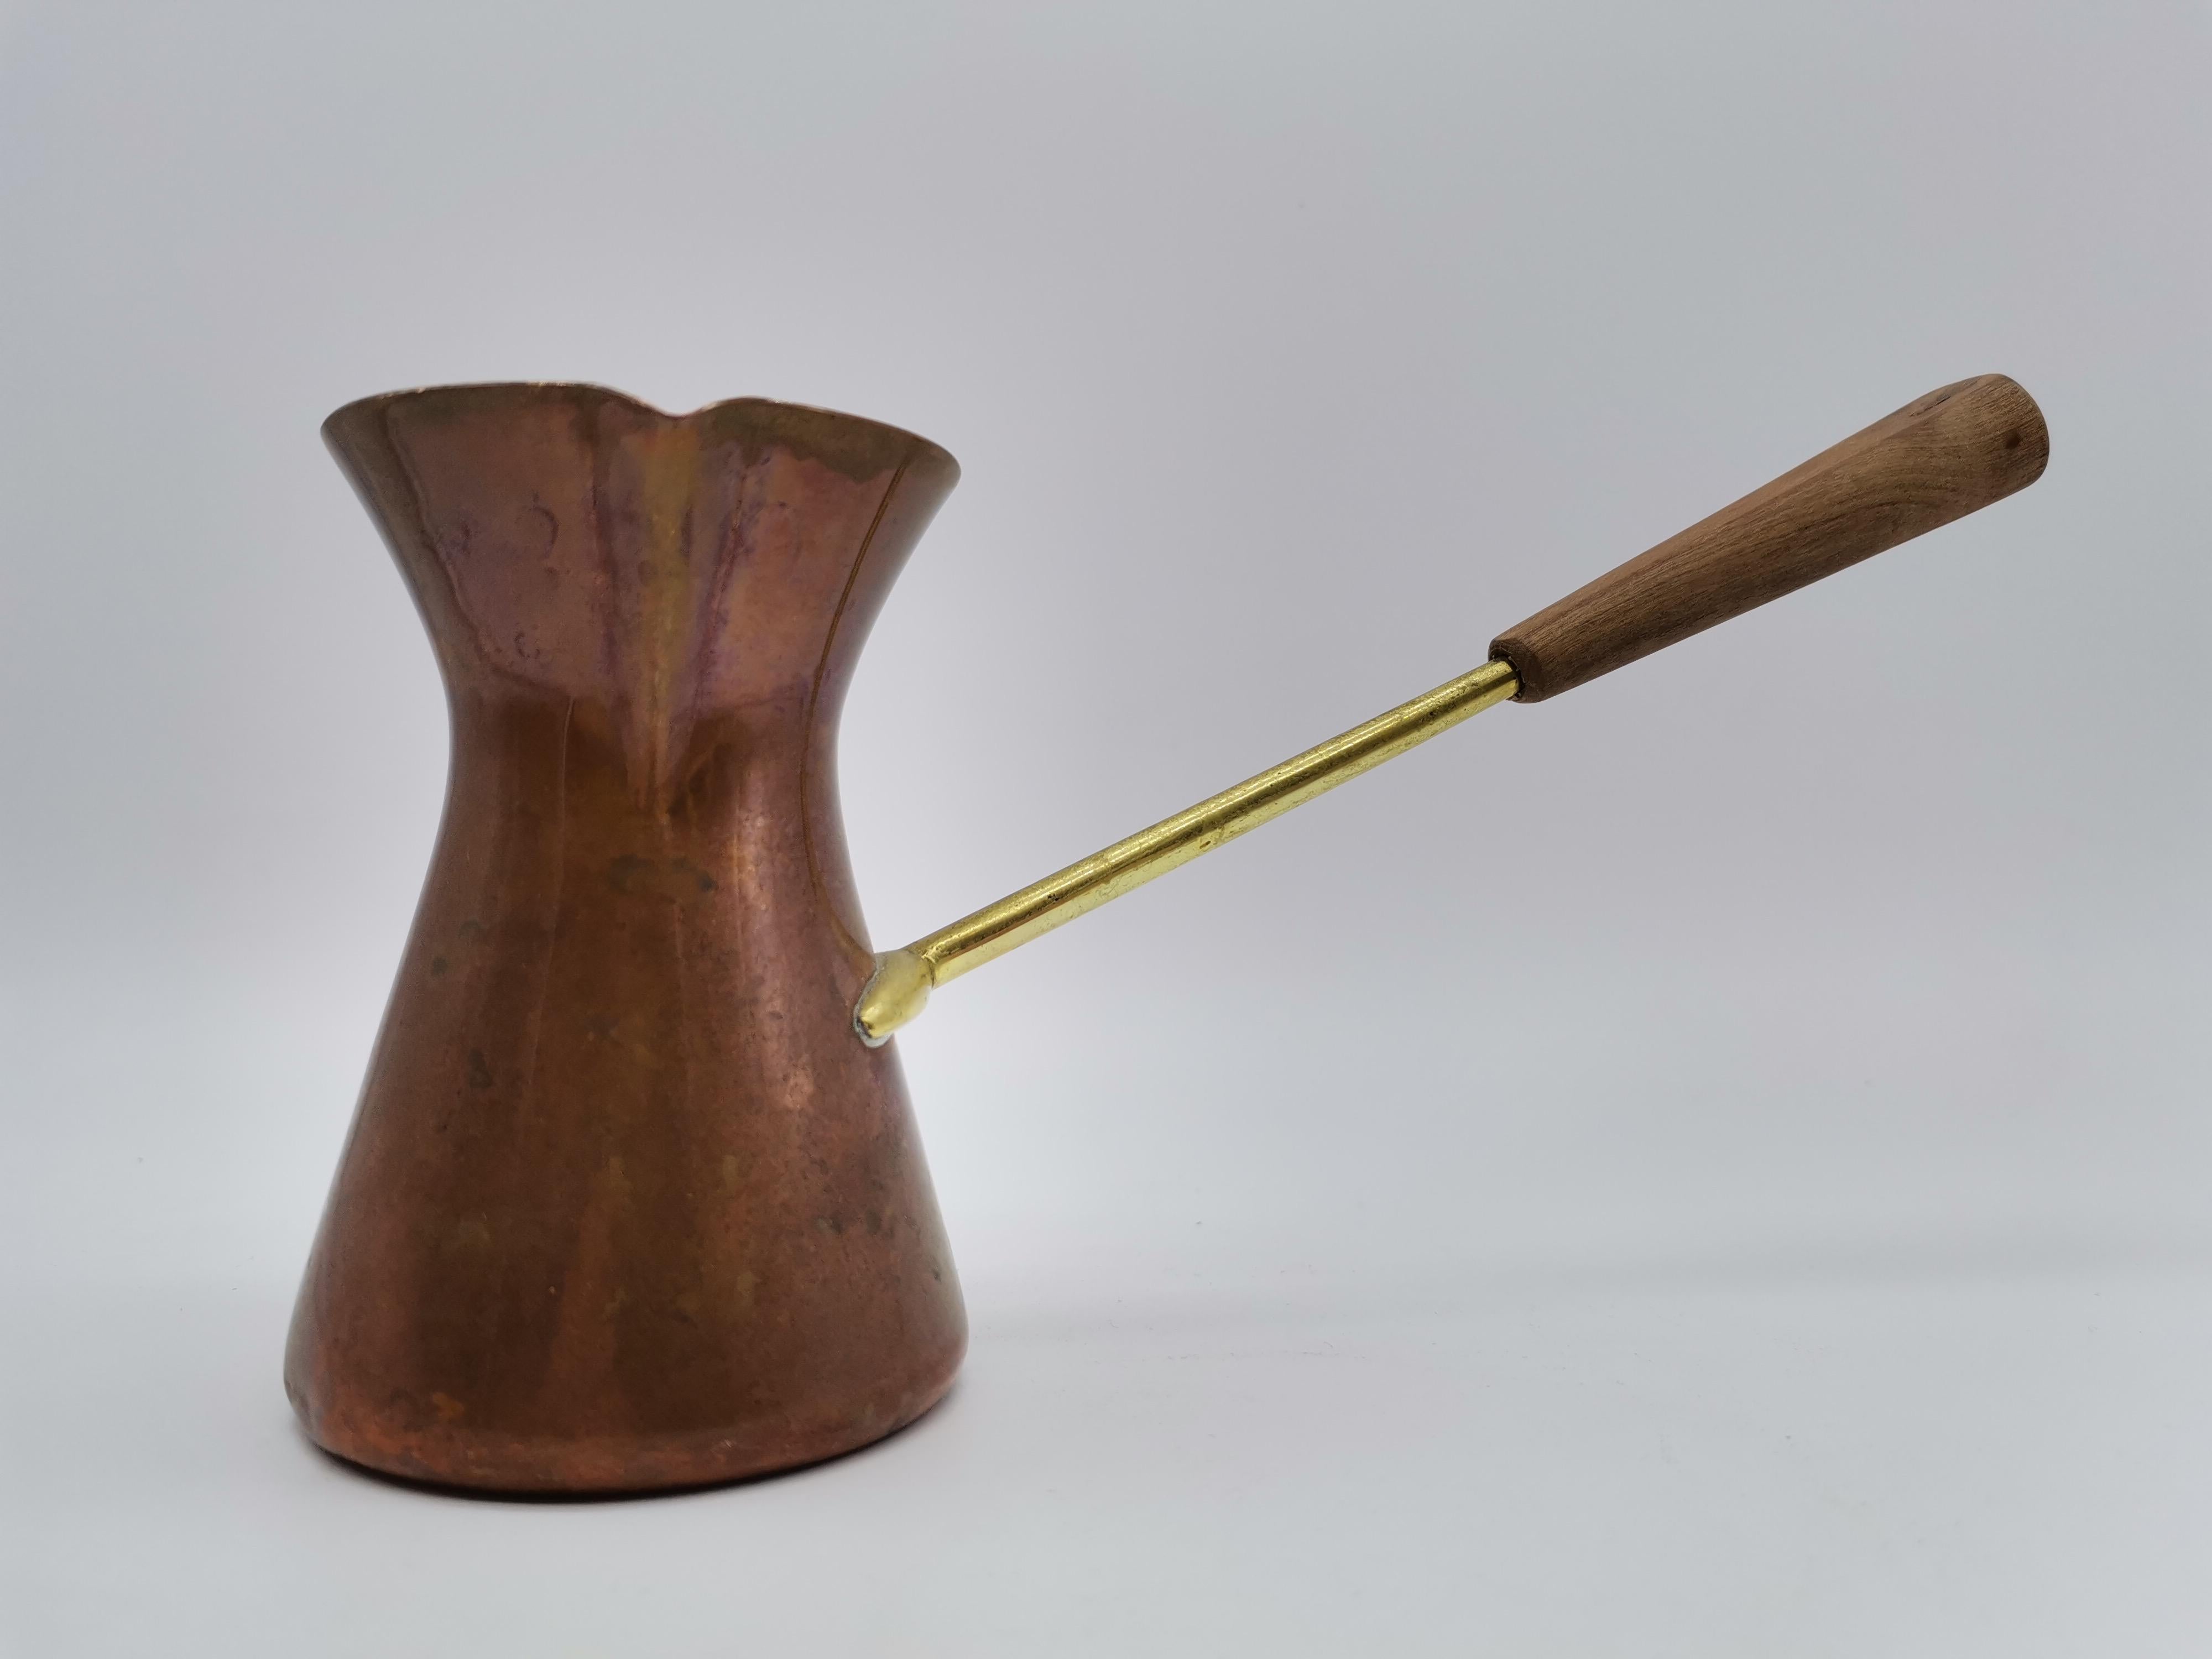 A small coffee pot for mokka coffee by Karl Hagenauer Vienna. Wooden handle.